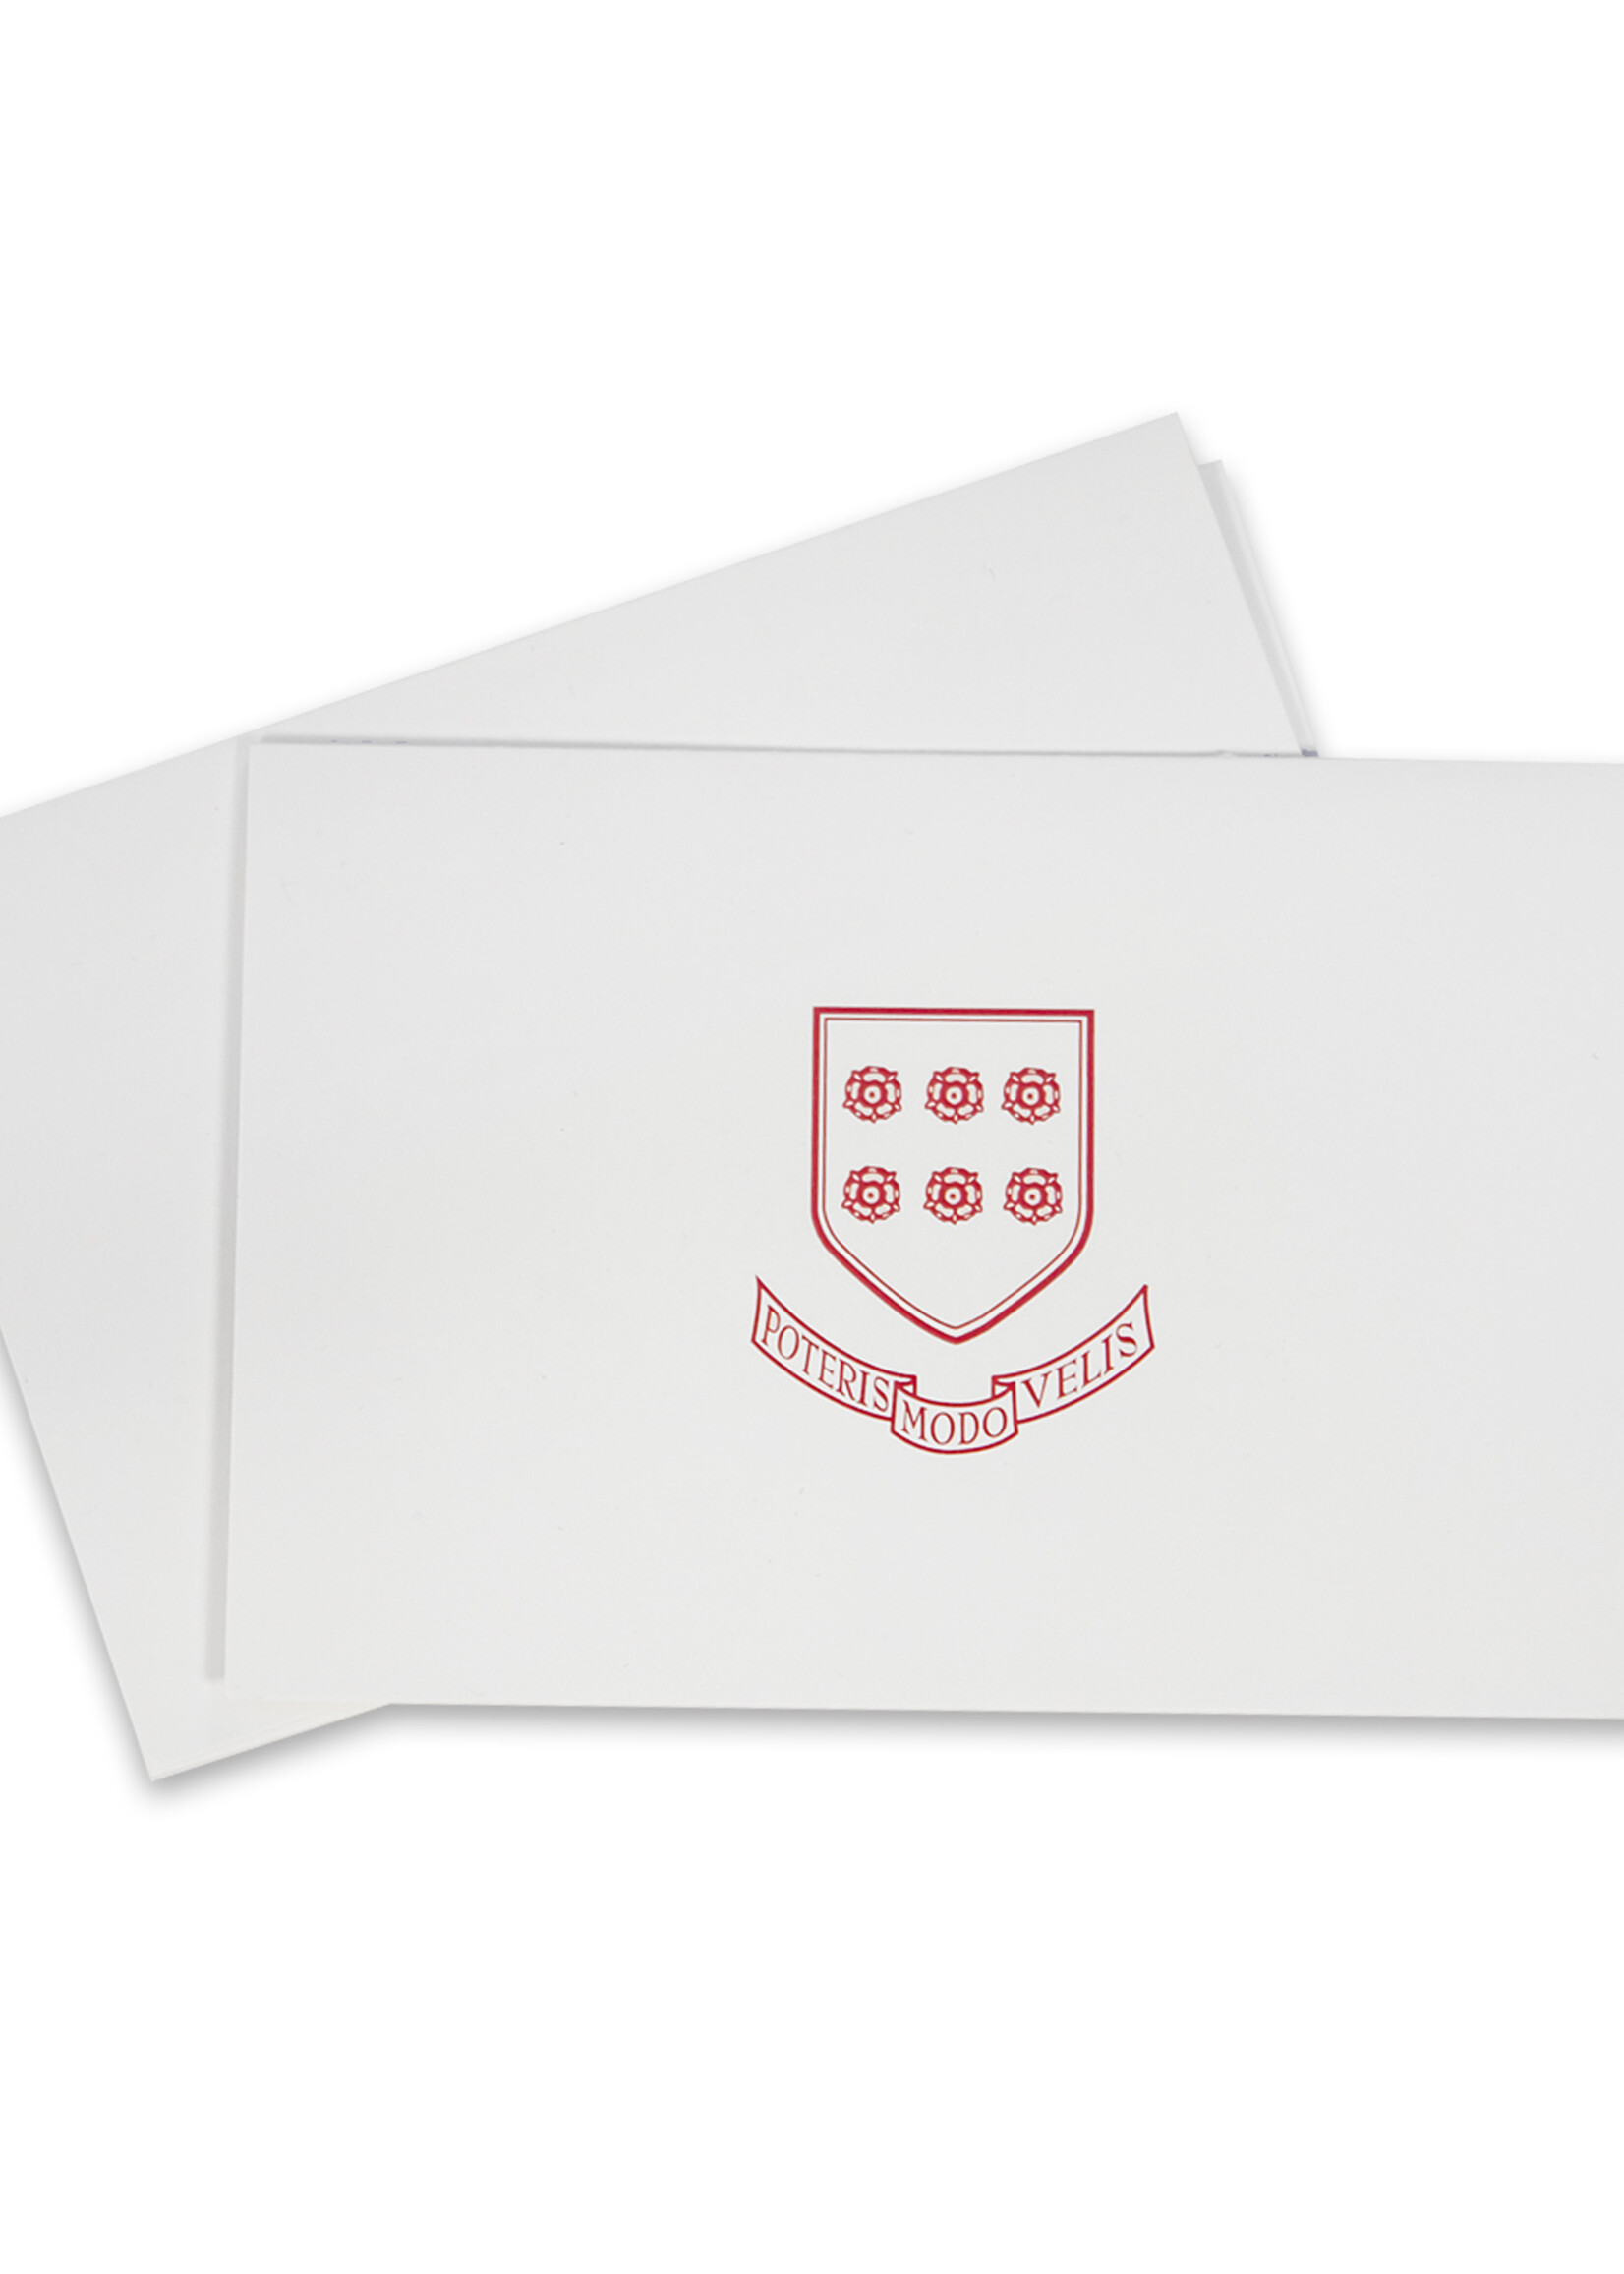 Fowler Printing & Graphics New Fay School Crest Notecards 4x6